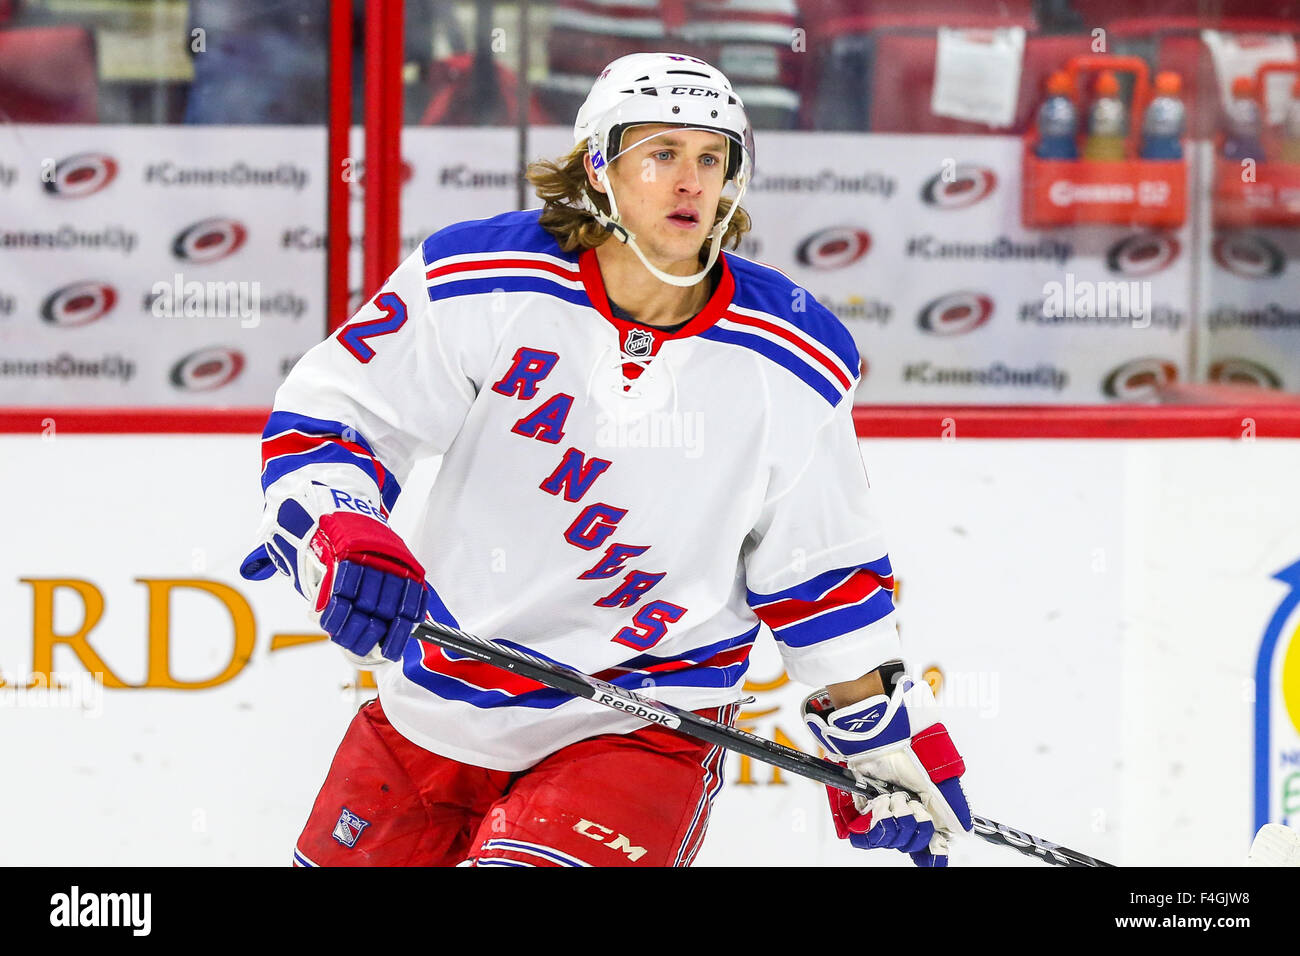 The Rangers Could Really Use Carl Hagelin